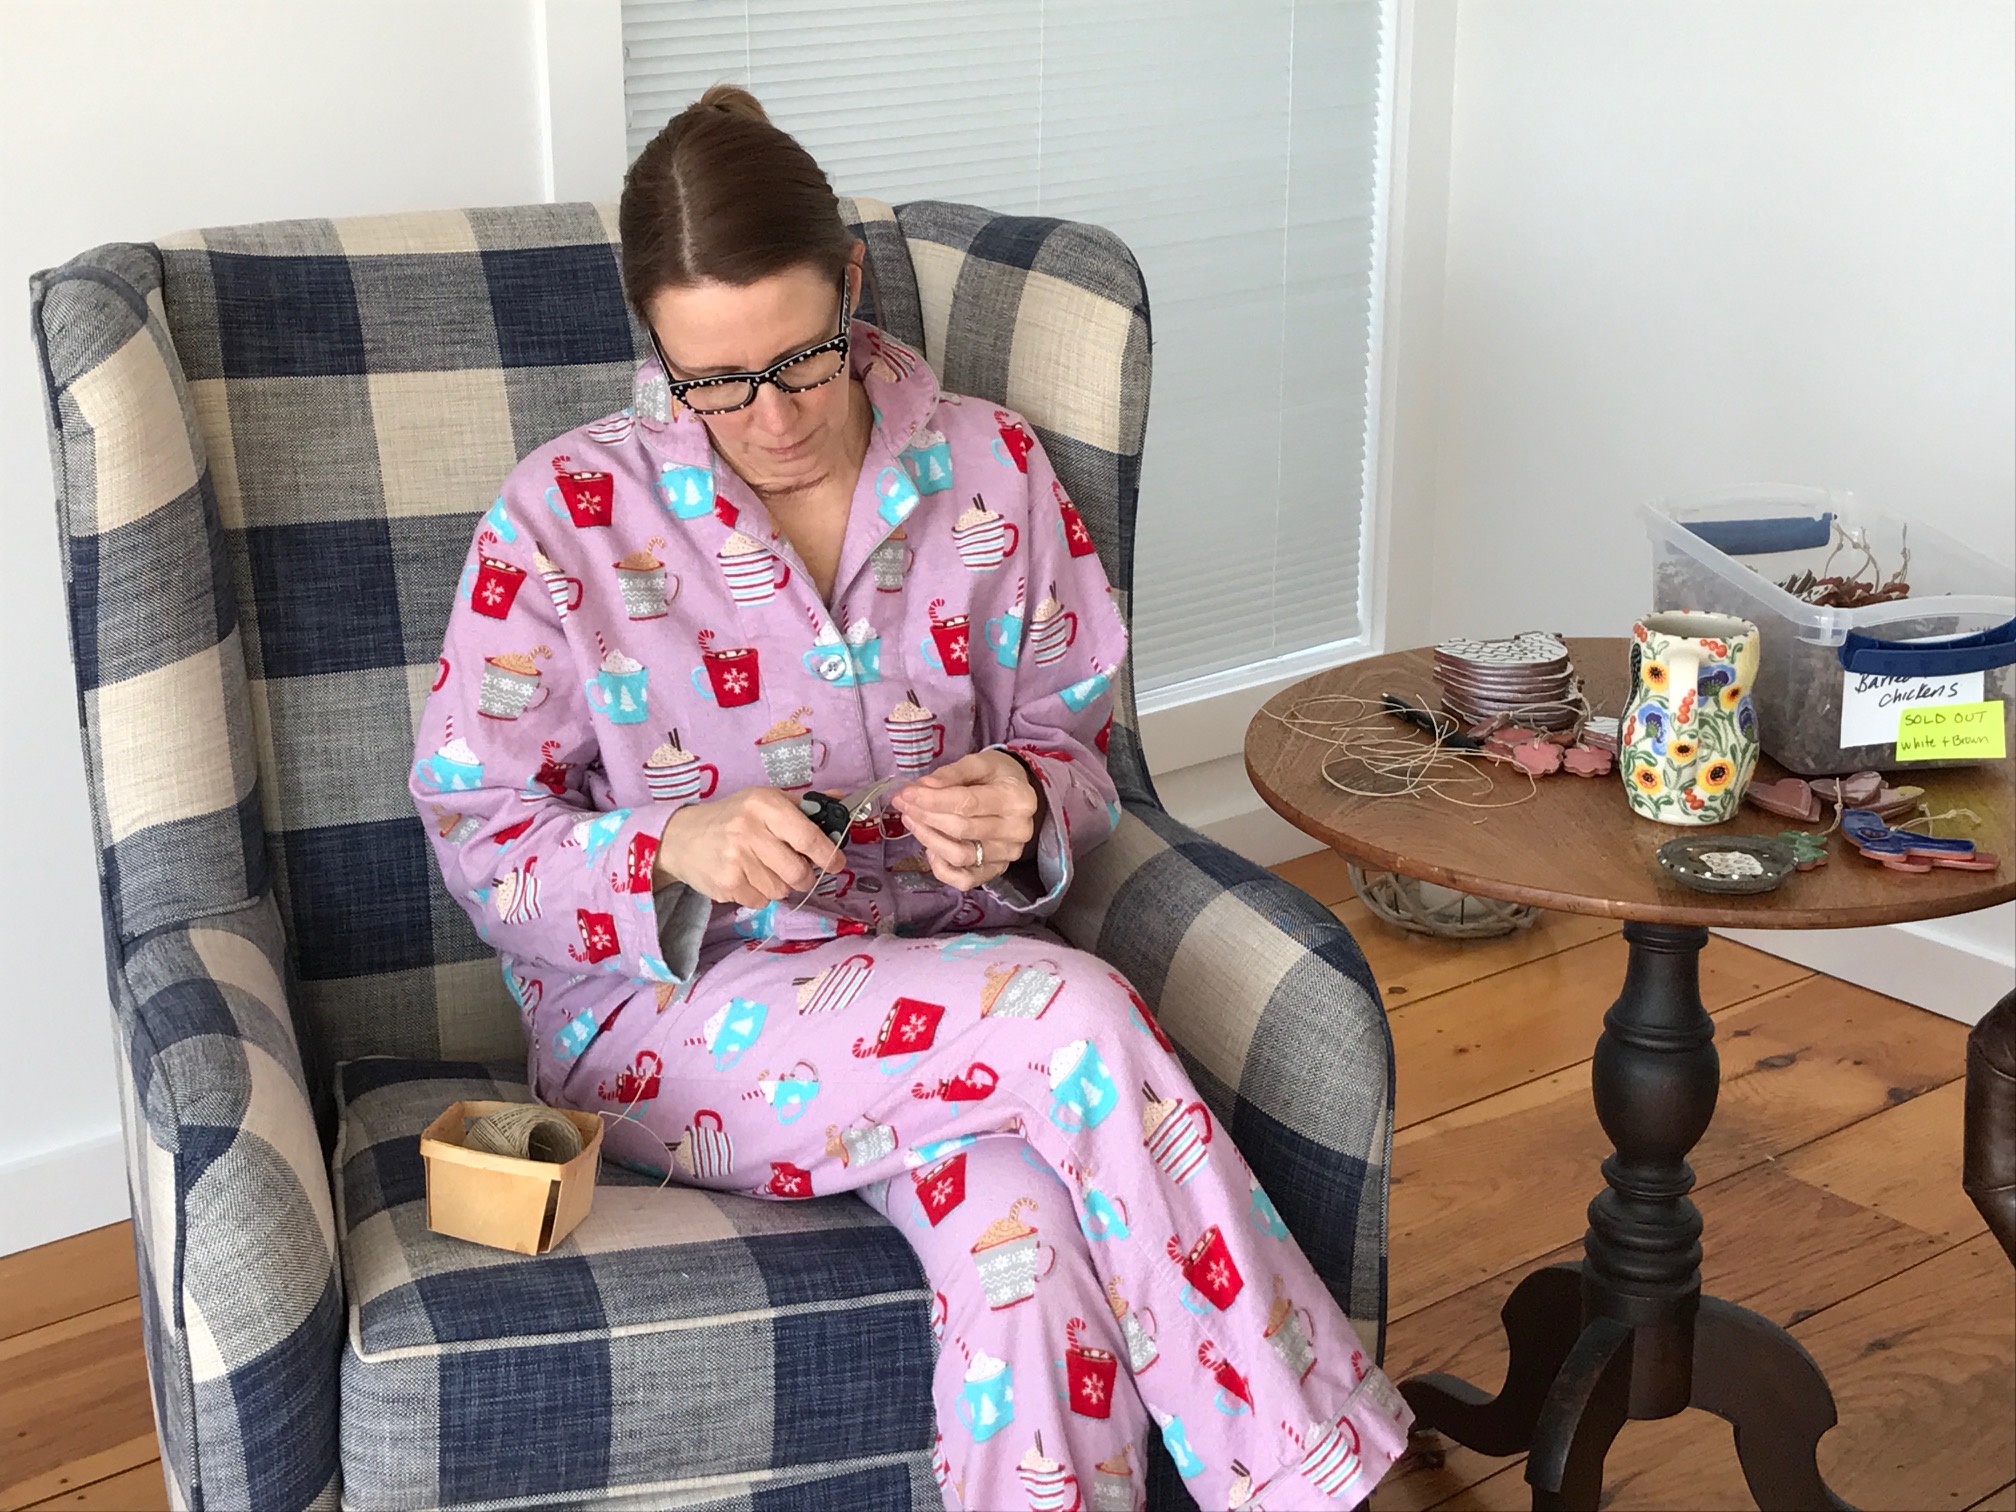 Meanwhile in Pajamaland…